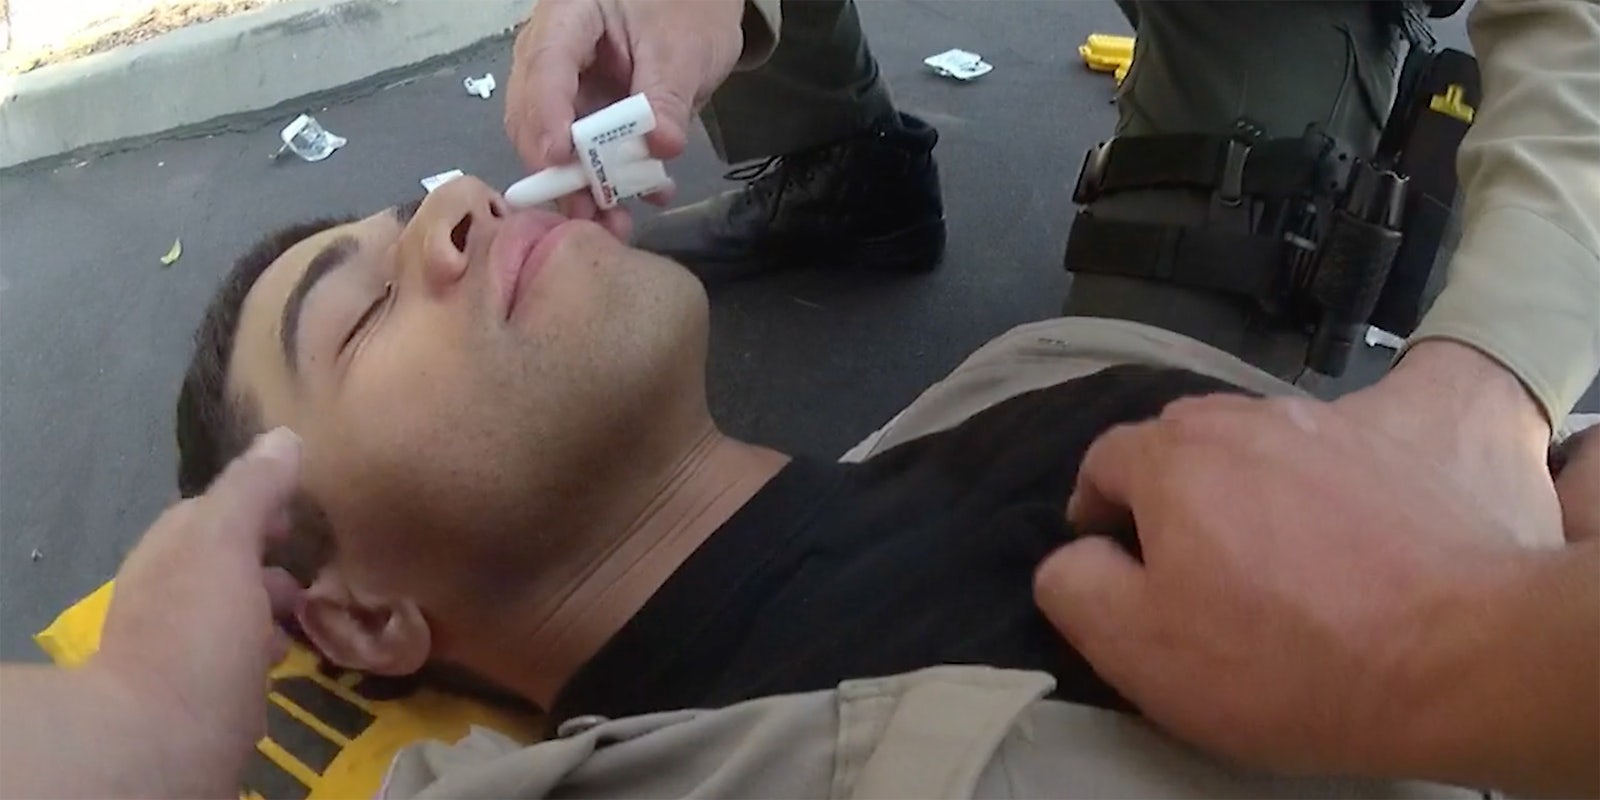 A police officer being given medication.